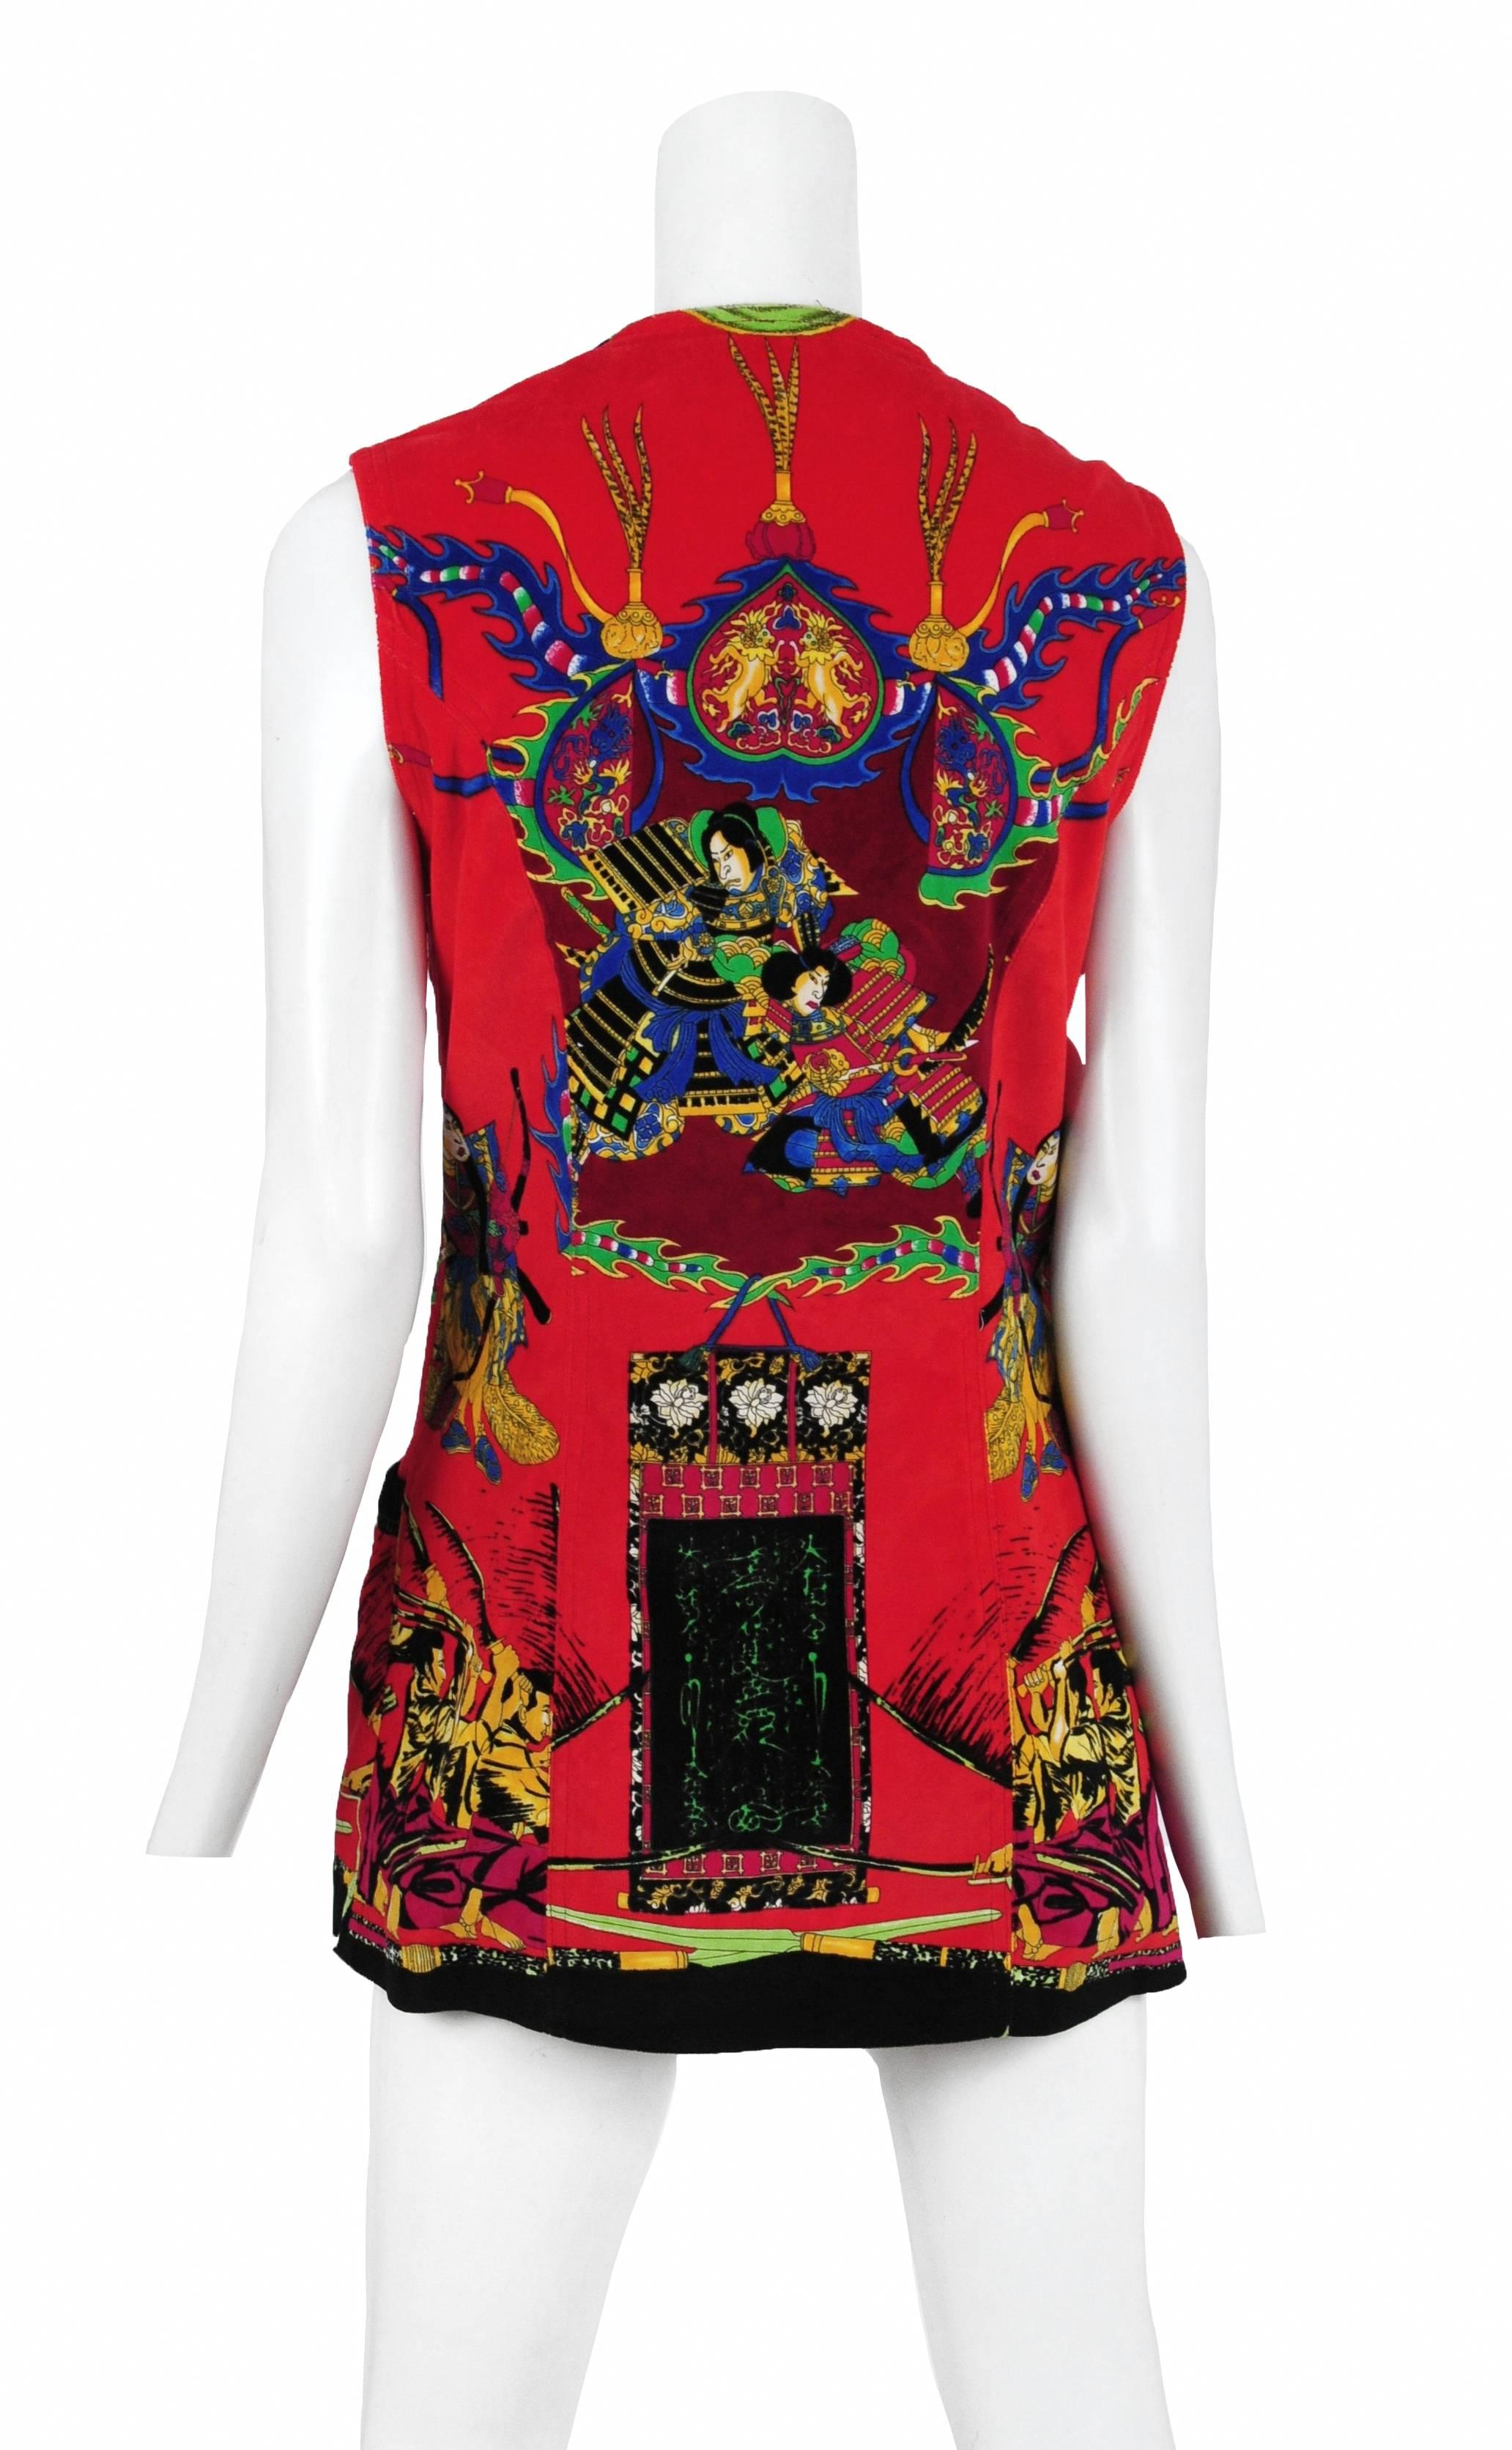 Vintage Gianni Versace red cotton velvet vest featuring a Samurai print and gold buttons.